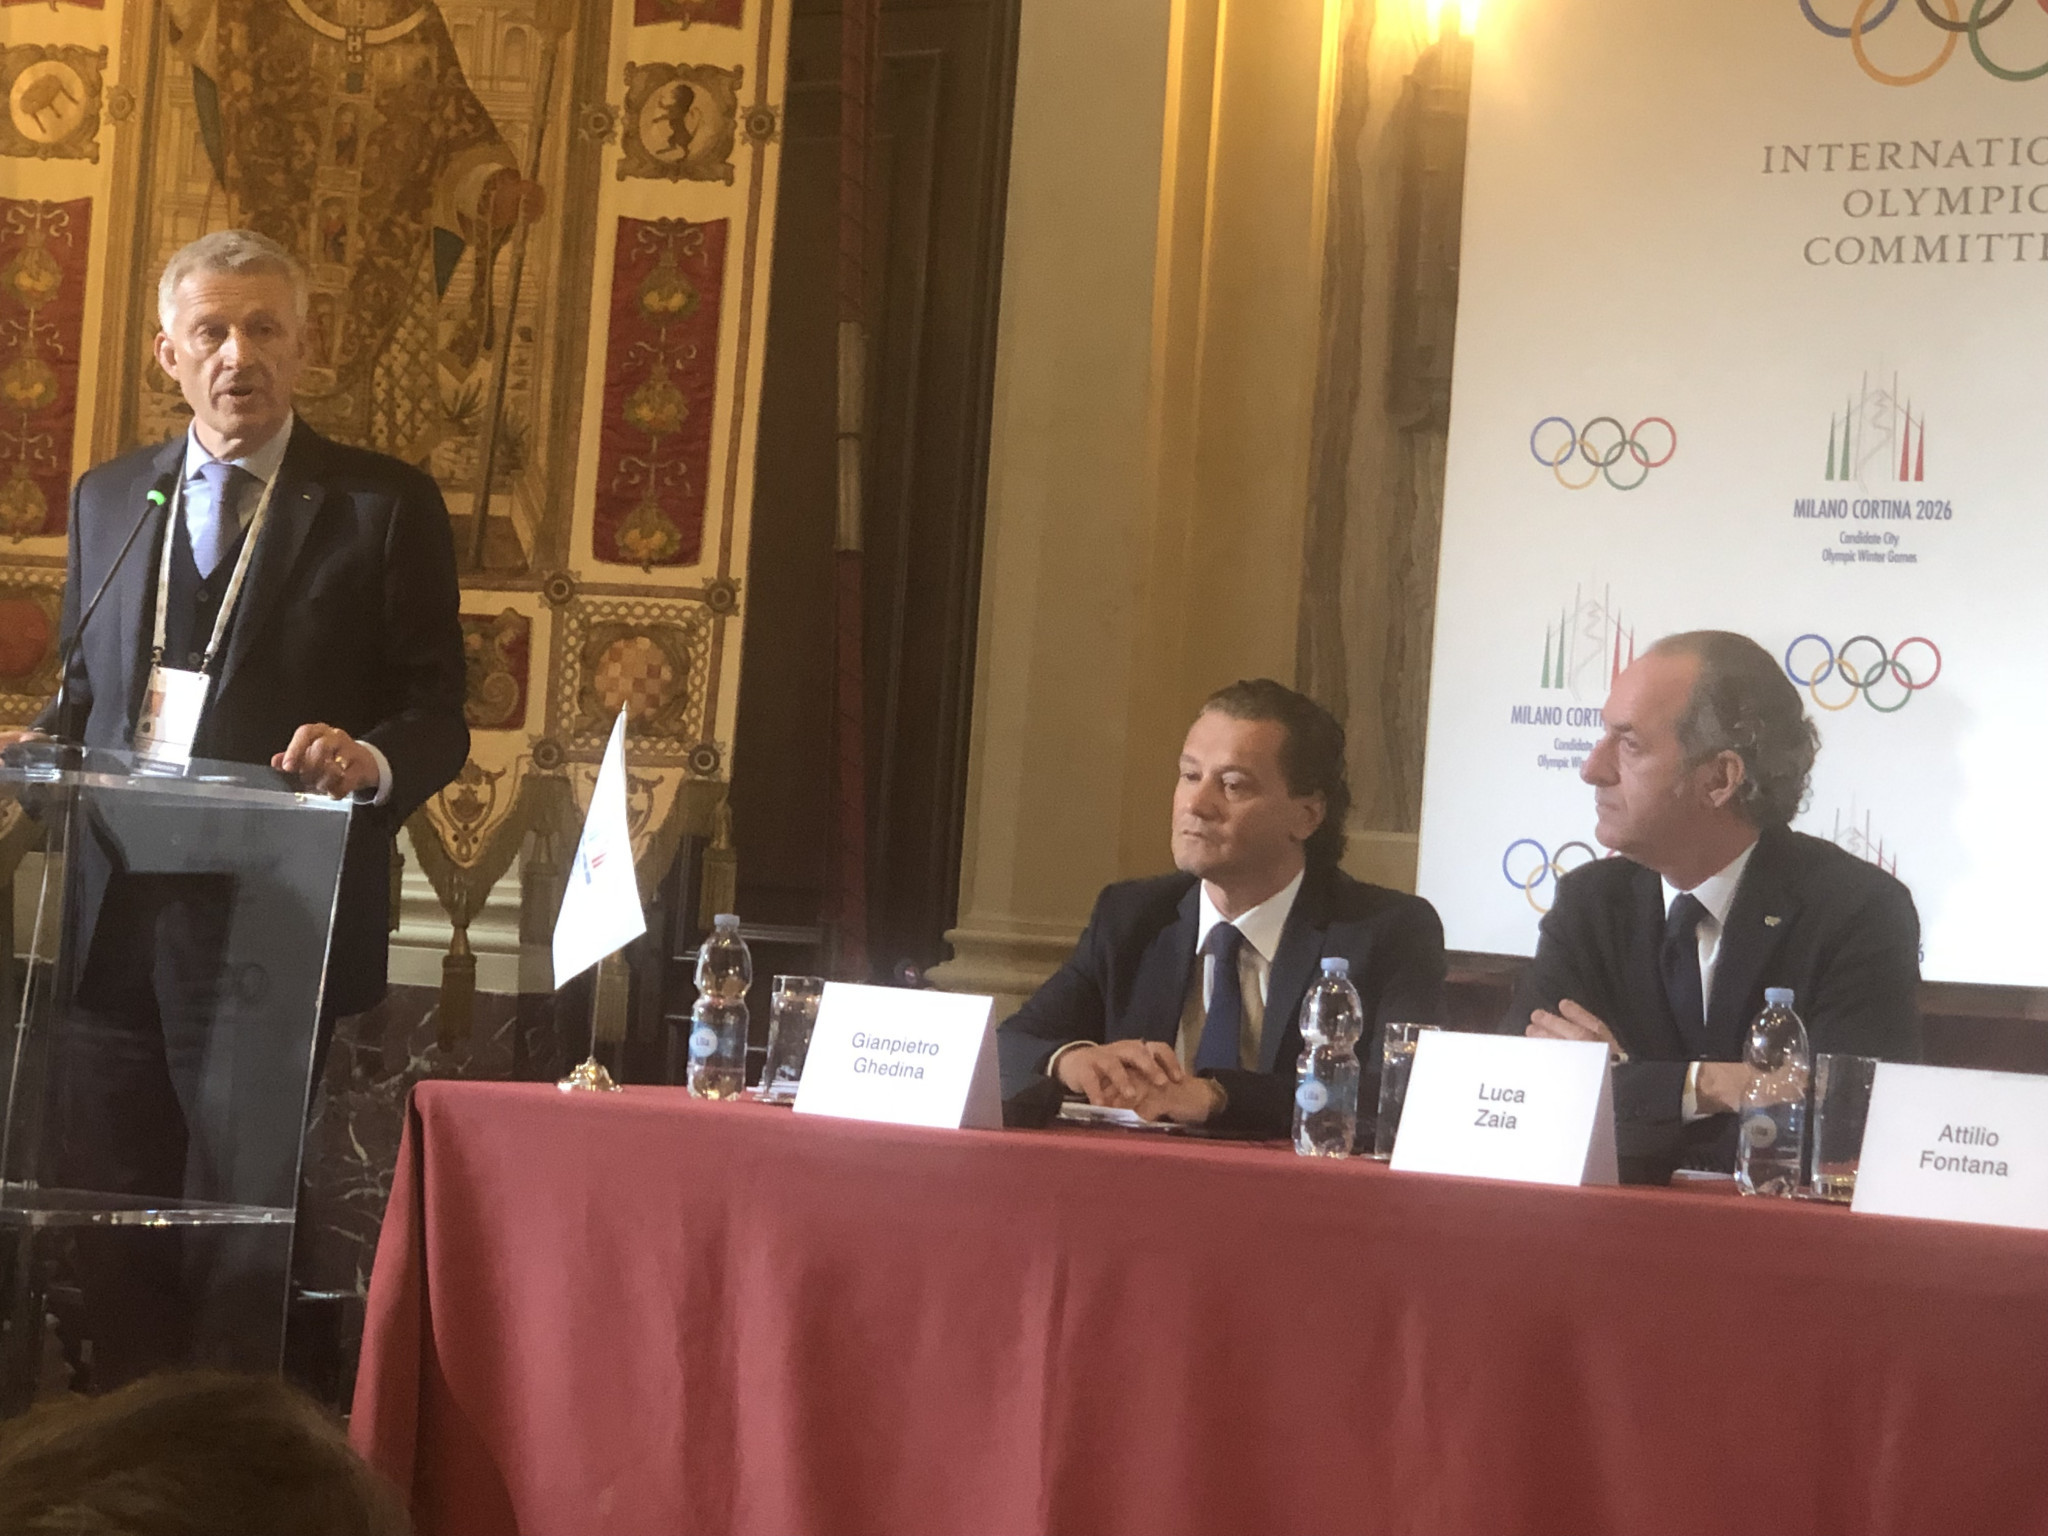 IOC Evaluation Commission chair Octavian Morariu claimed he was not surprised by the strong poll results that showed nationwide support for Milan Cortina 2026, with 83 per cent backing it ©ITG